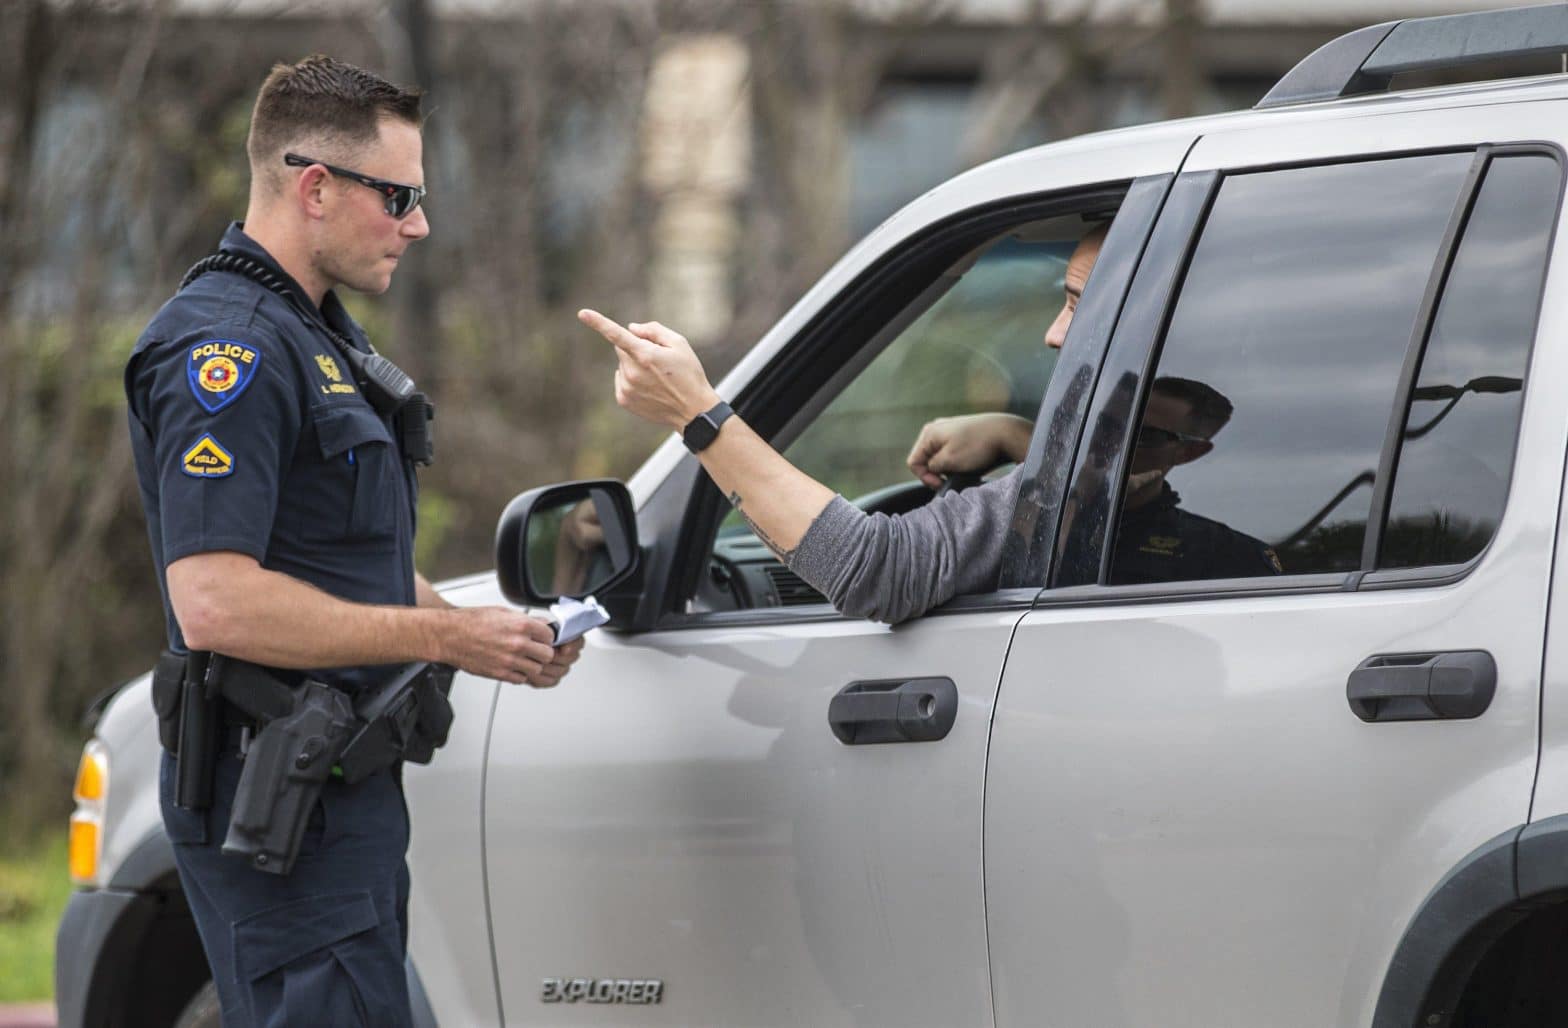 Police ‘Pretext’ Traffic Stops Need to End, Some Lawmakers Say